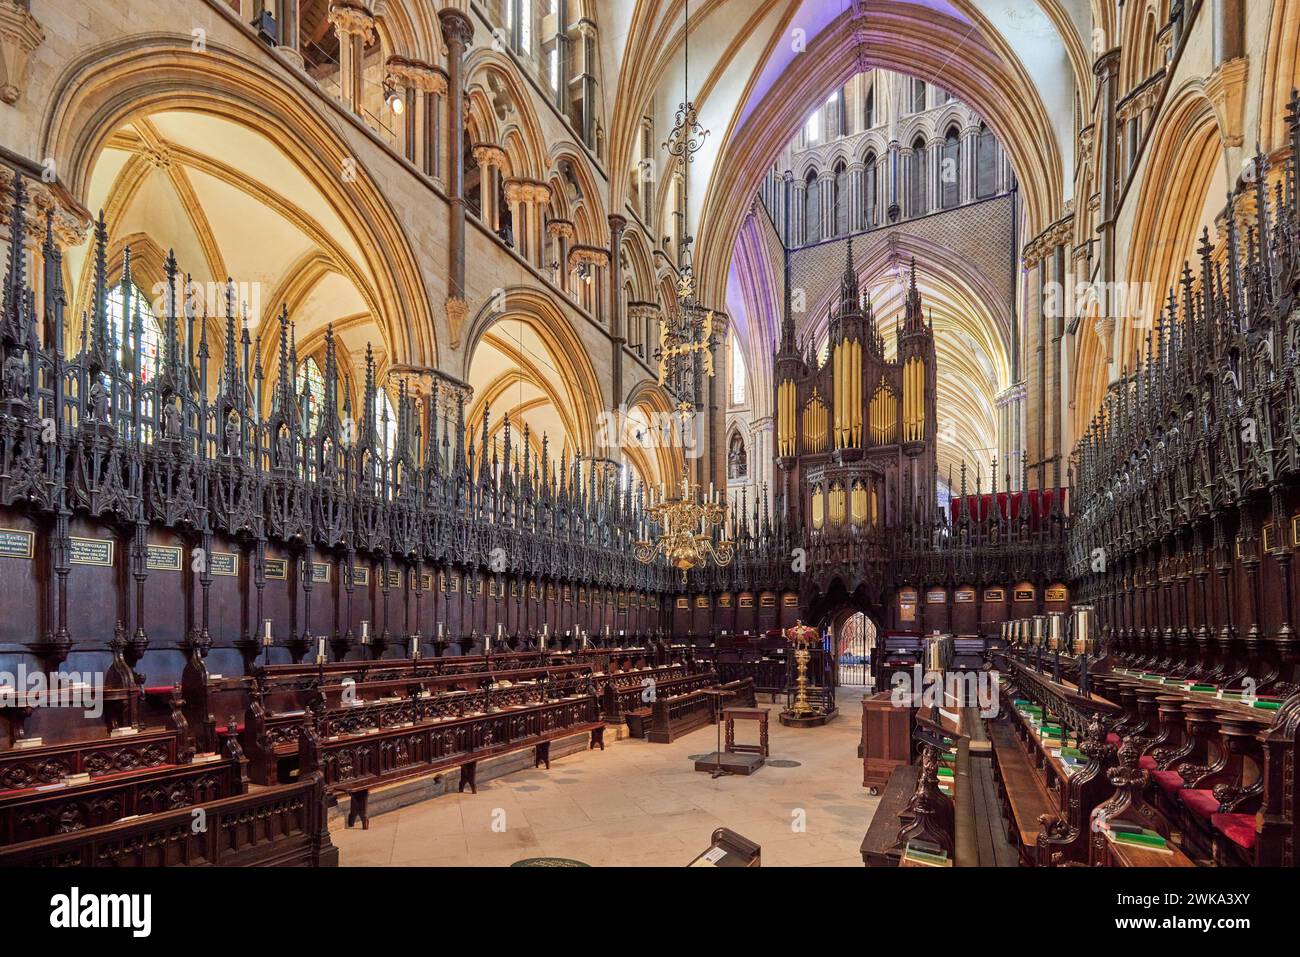 The Sanctuary. Also known as The 14th century Angel Choir and high altar of Lincoln Cathedral, Lincoln, Lincolnshire, England, United Kingdom Stock Photo